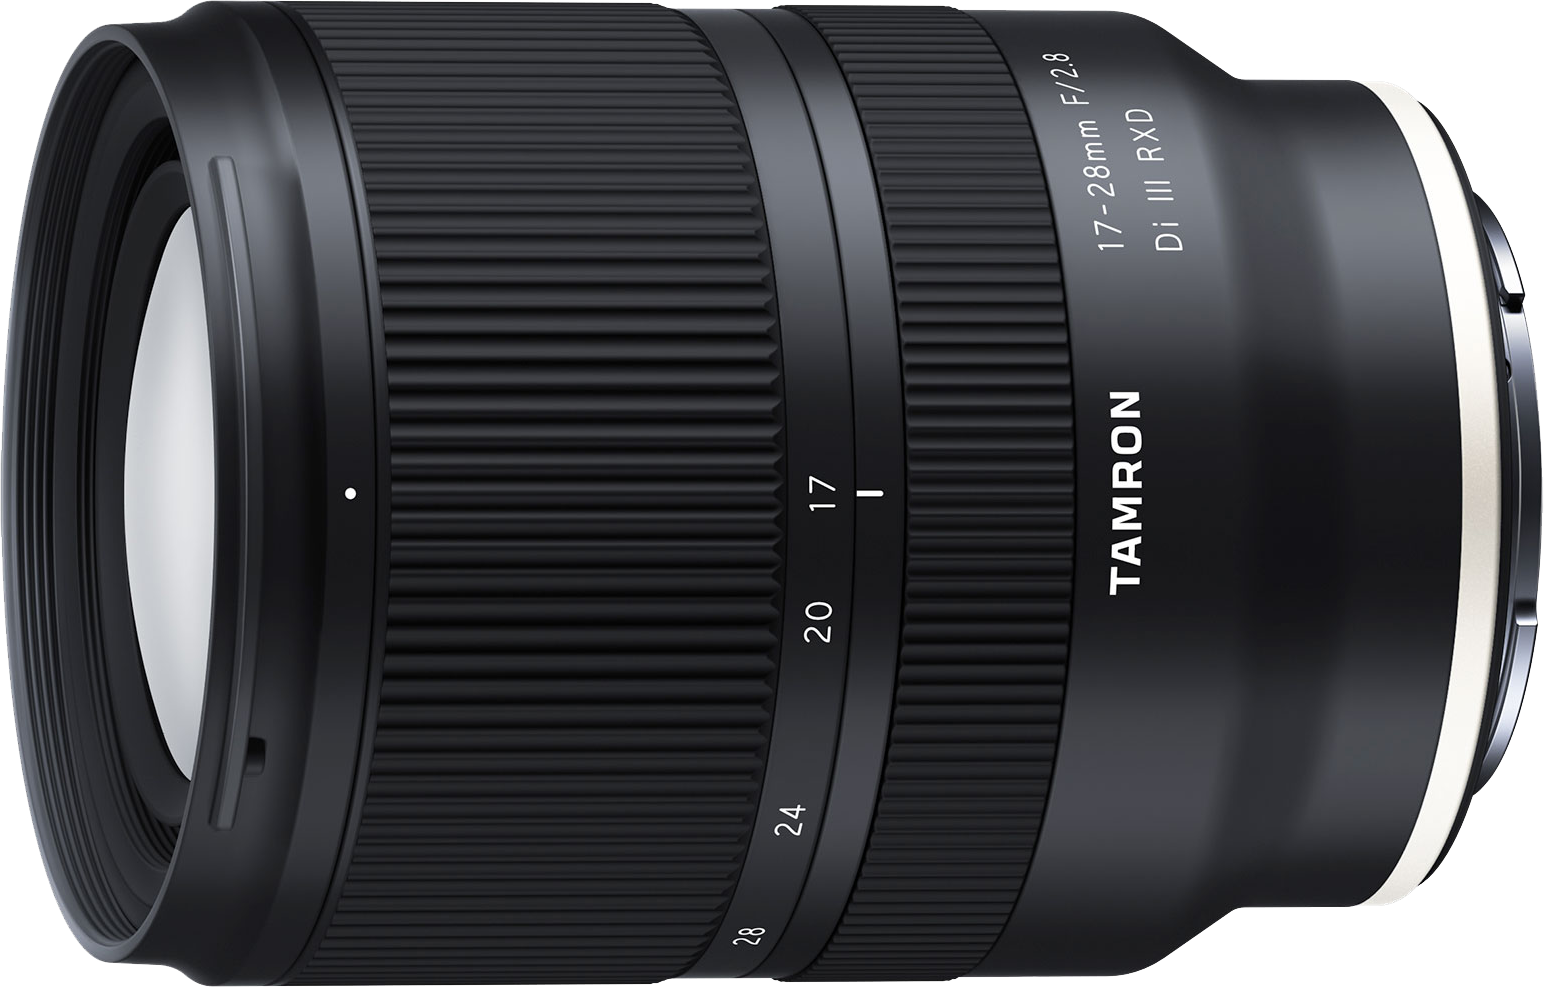 FE 200-600 mm F5.6-6.3 G OSS  Sony Store Colombia - Sony Store